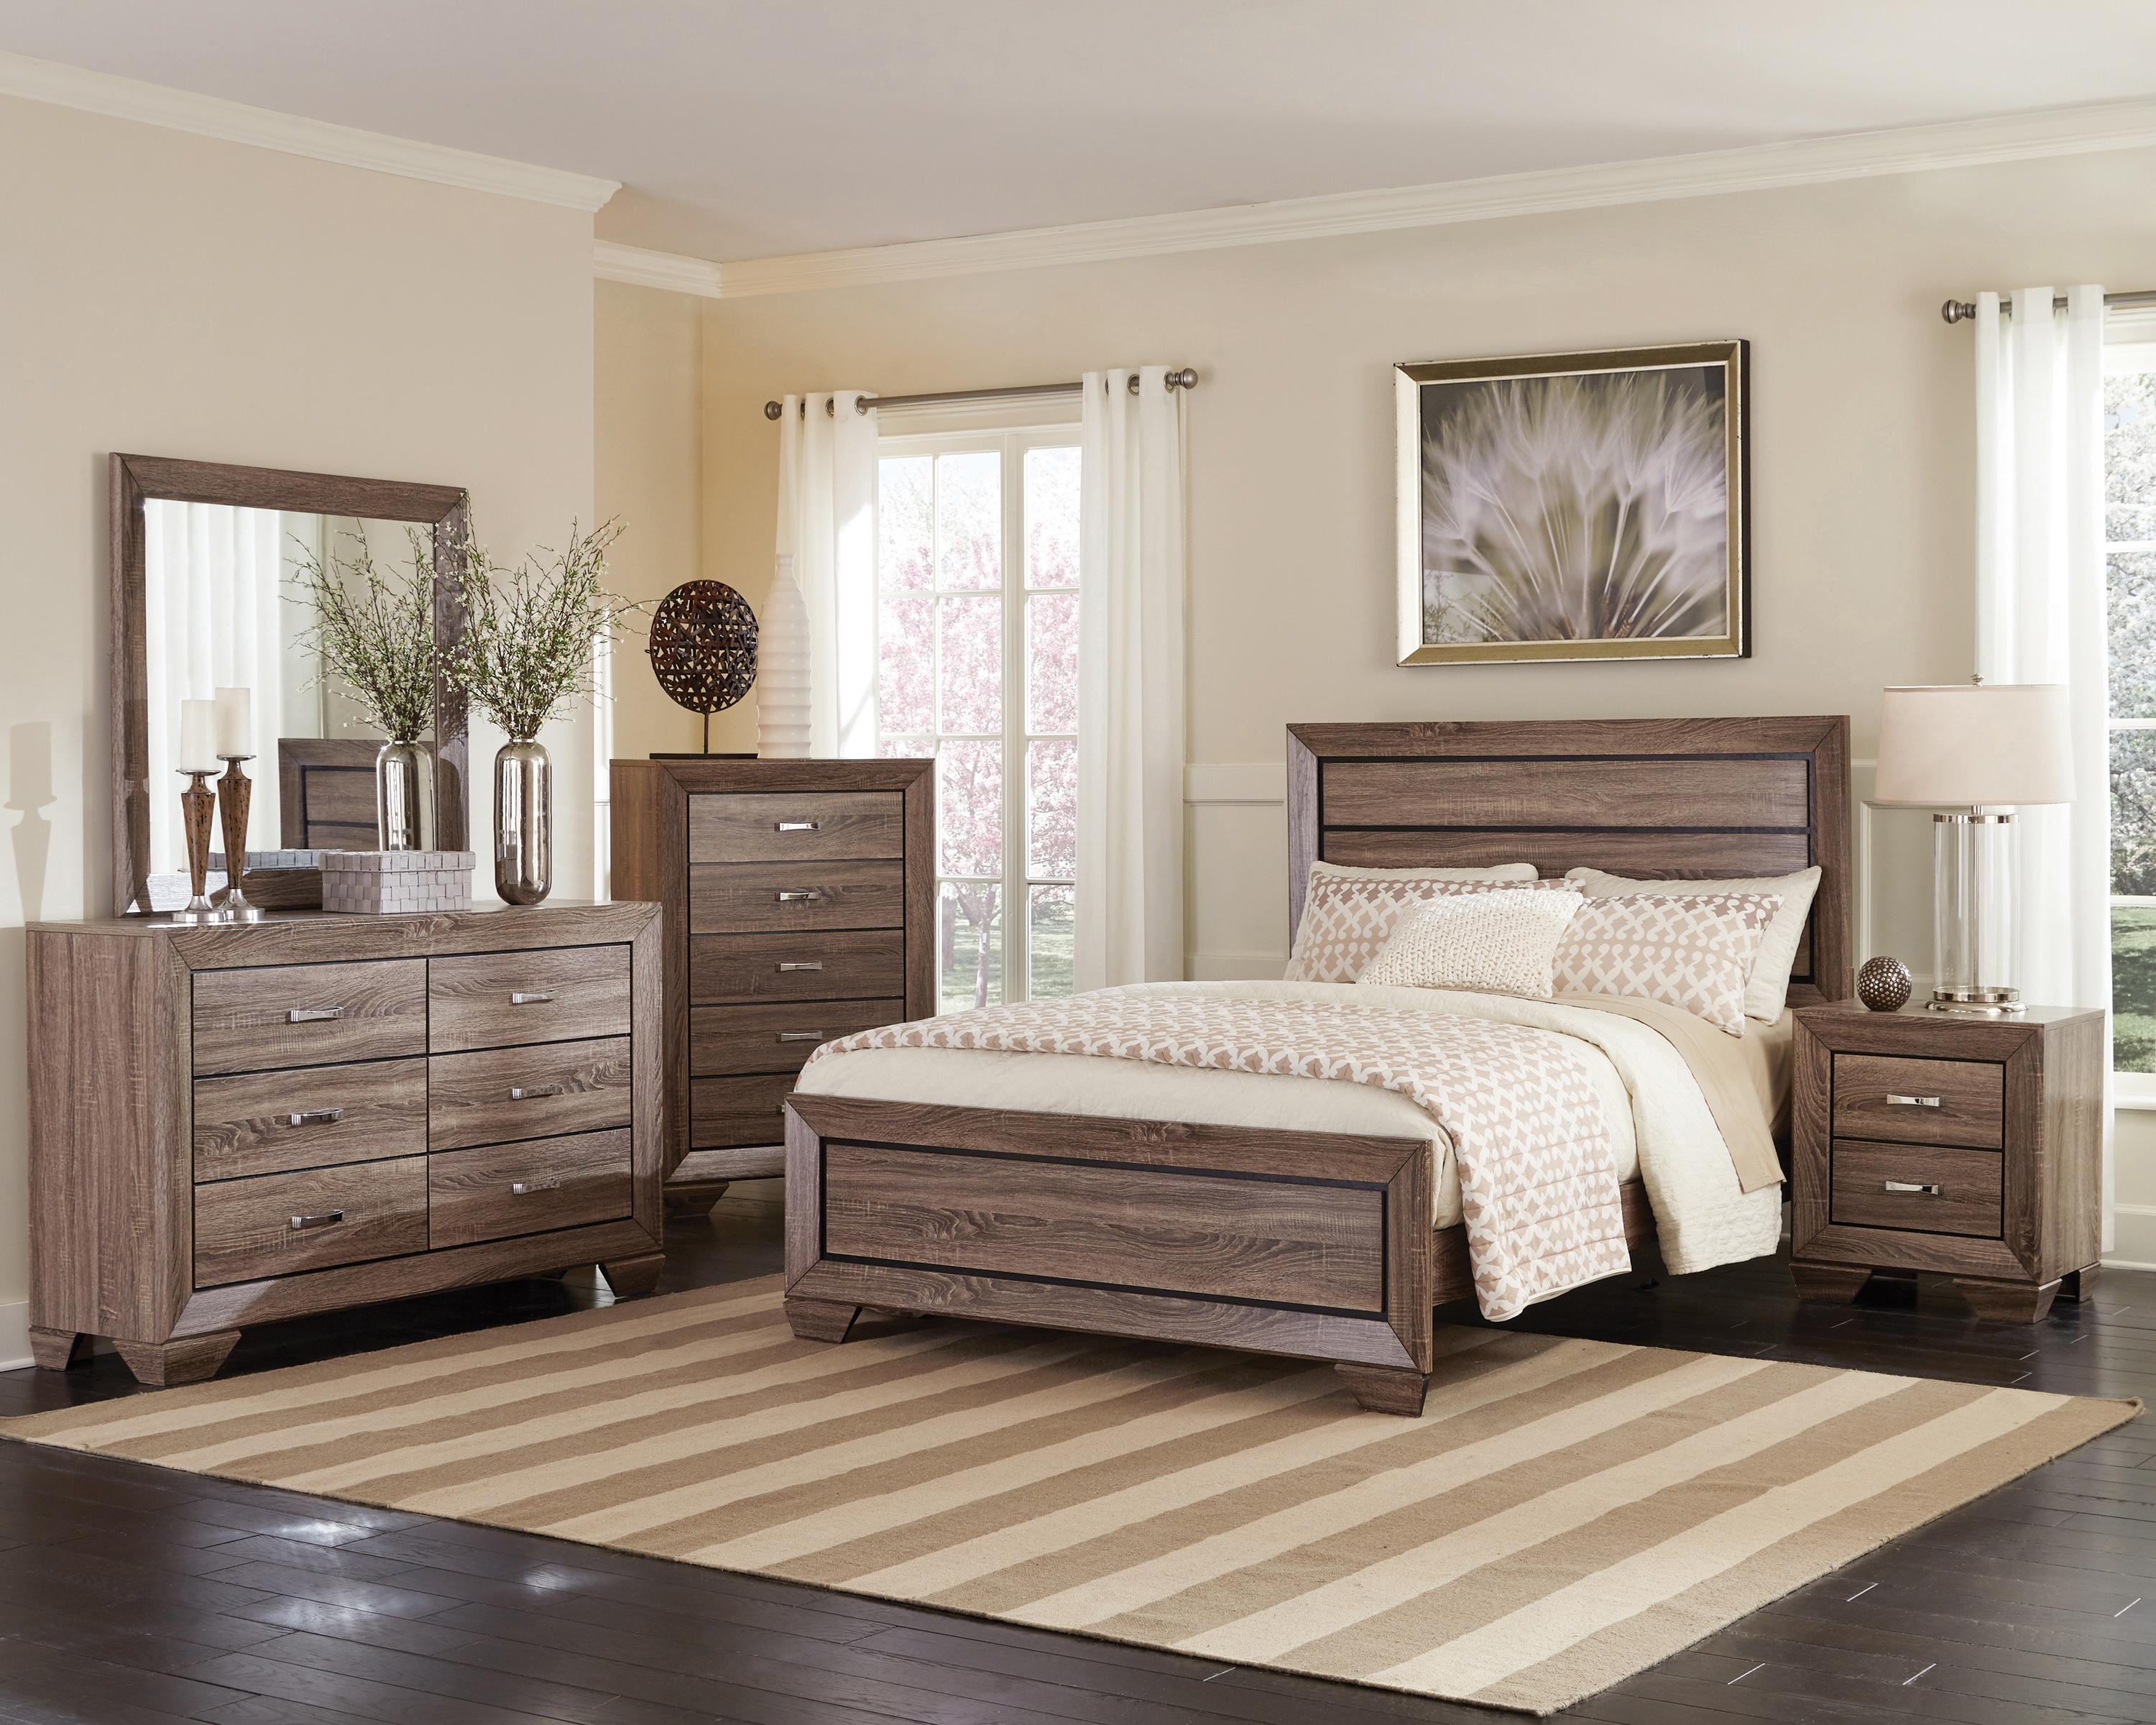 Transitional Bedroom Set 204190KW-5PC Kauffman 204190KW-5PC in Taupe 